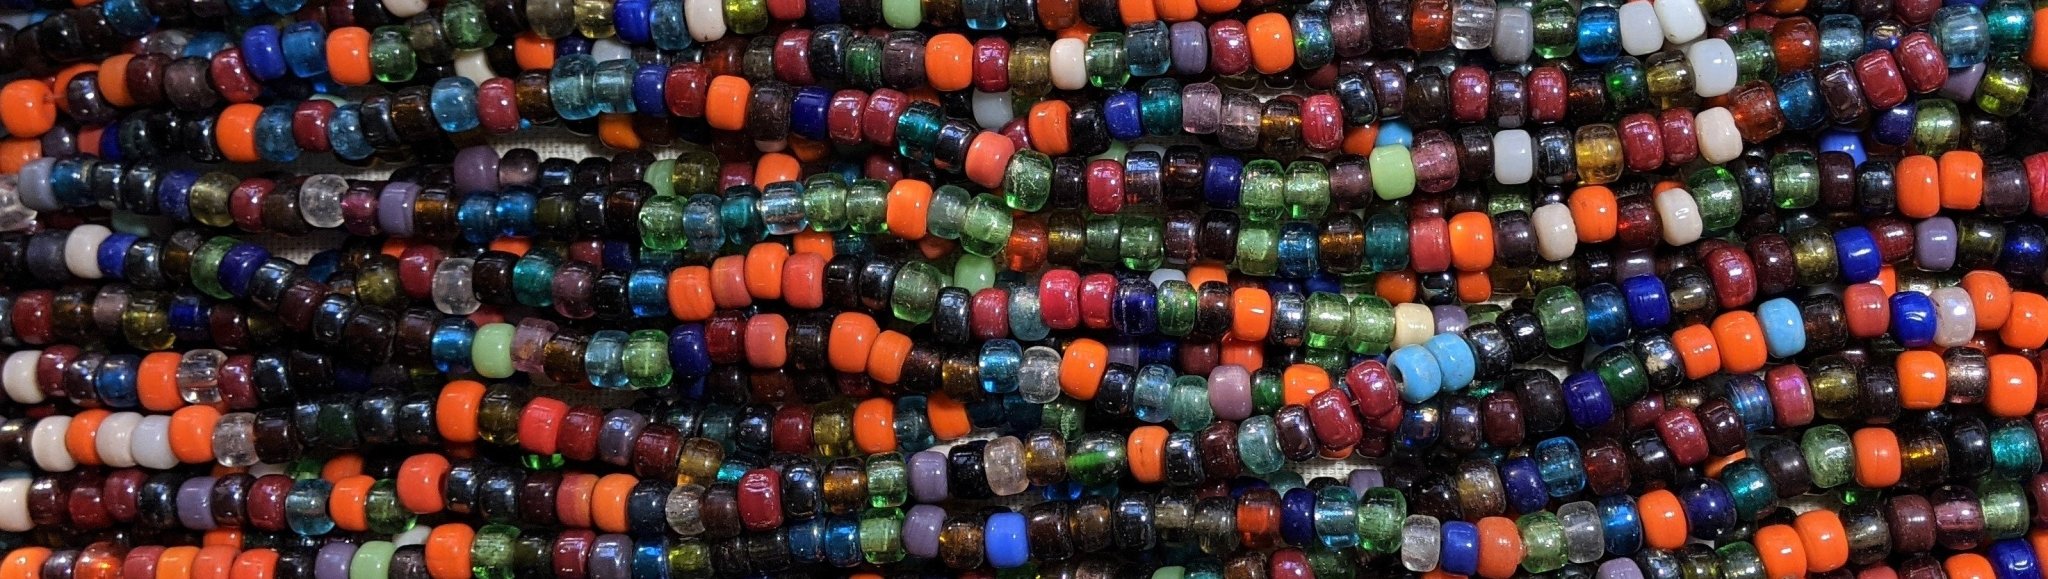 Rainbow Color Mix - Size 9x6mm (3mm hole) Recycled Glass Crow Beads - 24 Inch Strand (ICB31) - Beads and Babble